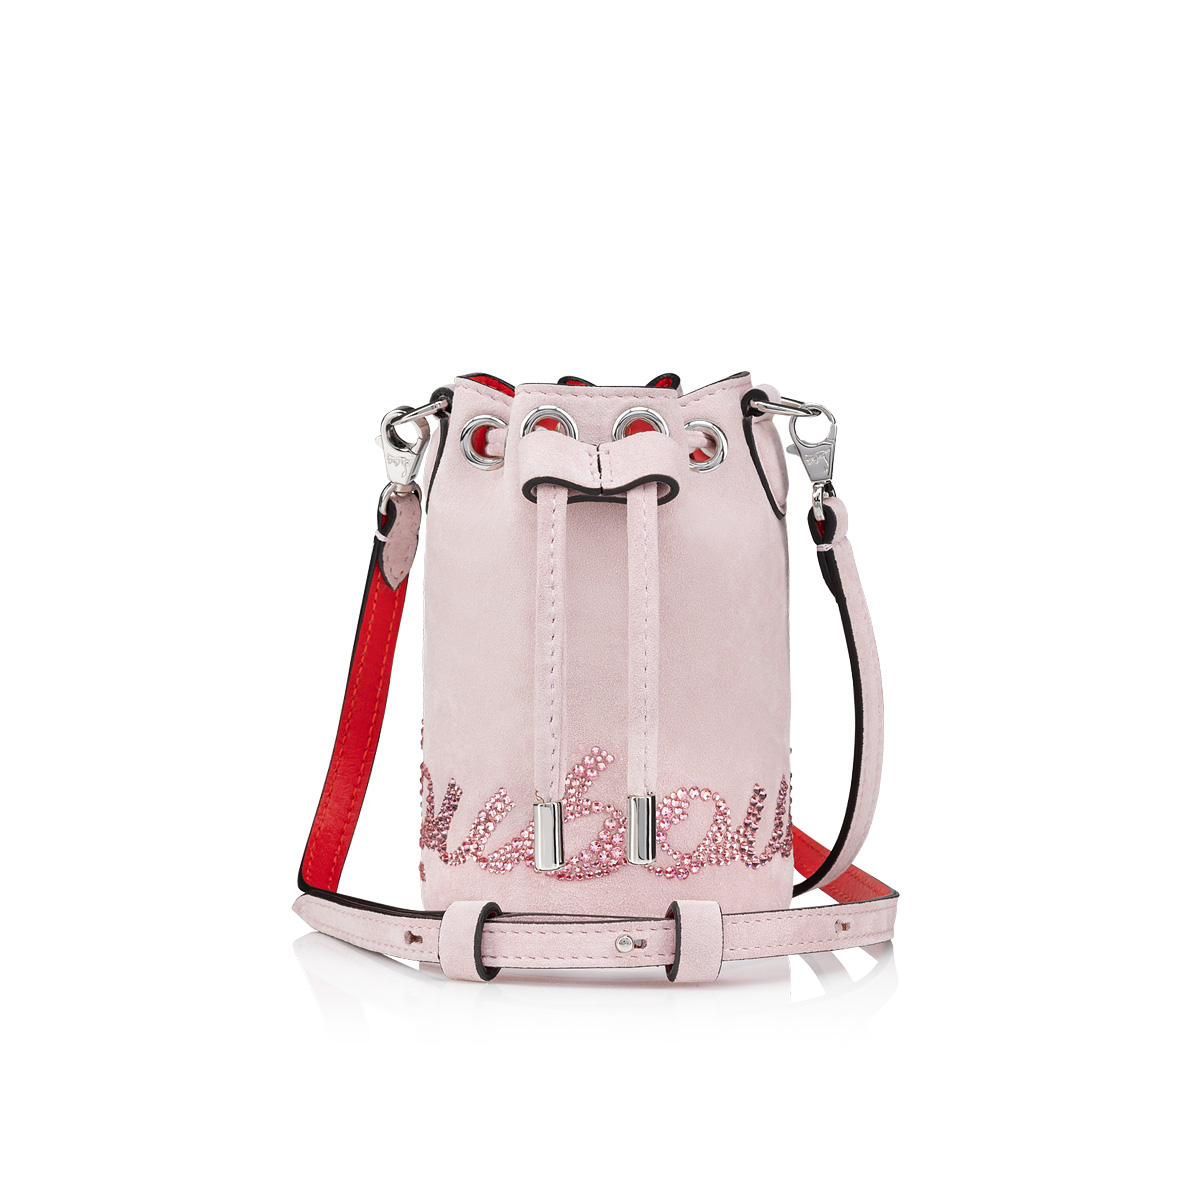 Jane mini - Bucket bag - Leather, veau velours and strass - Rosy - Louboutin